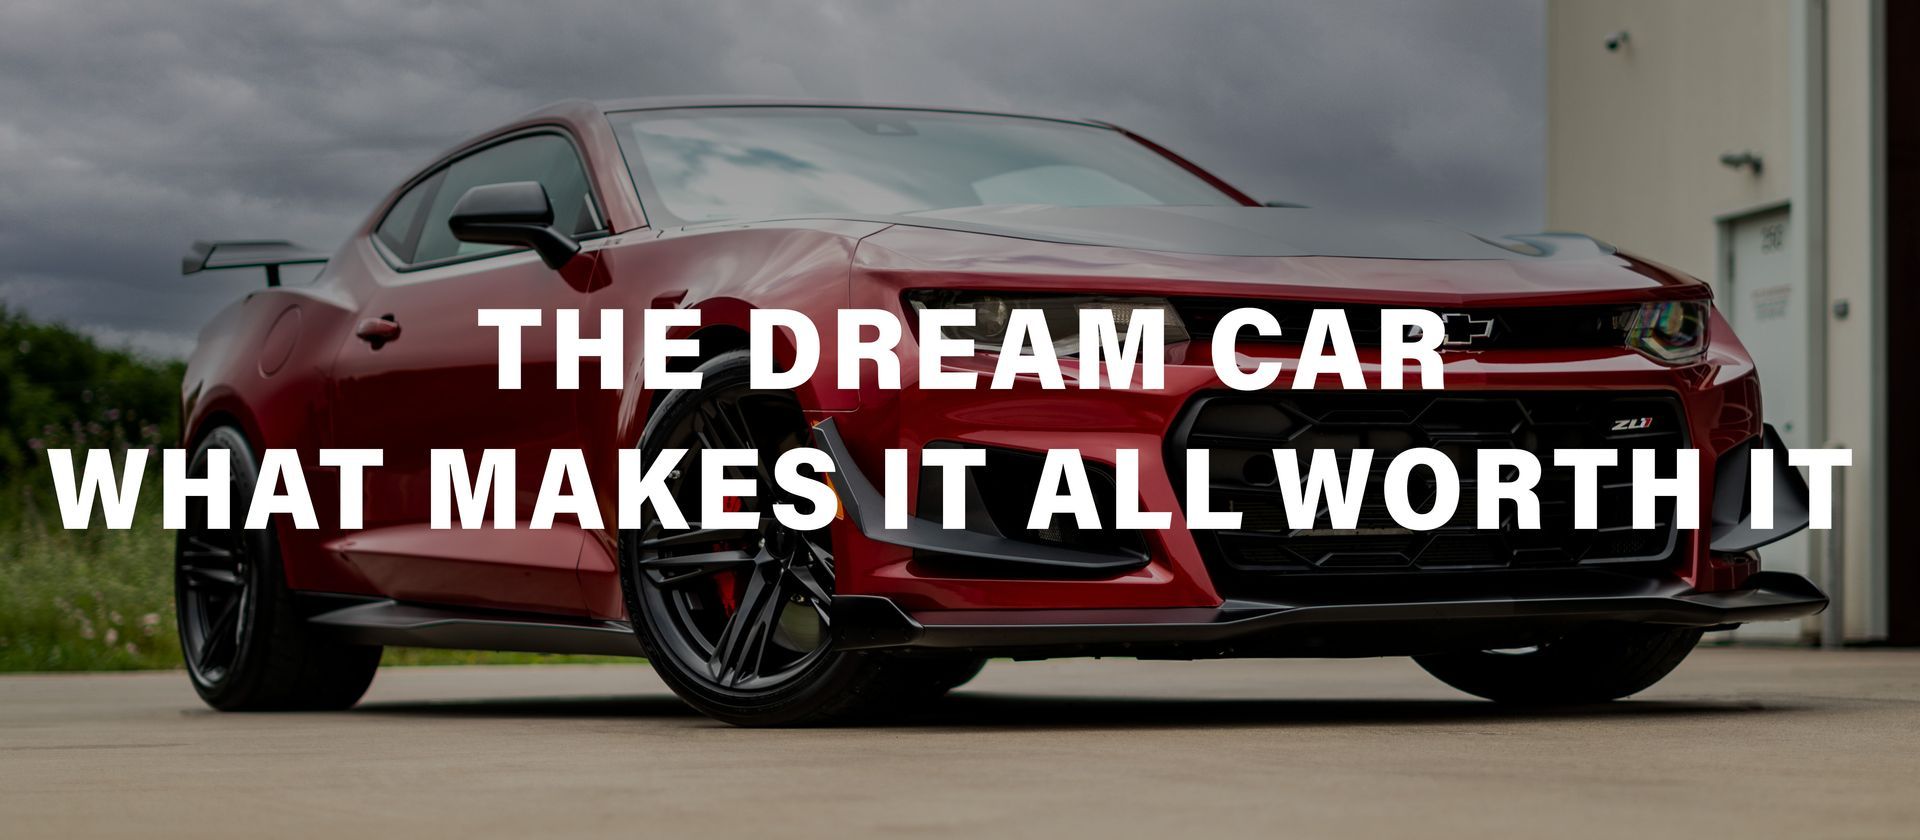 A red car with the words `` the dream car what makes it all worth it '' written on it.